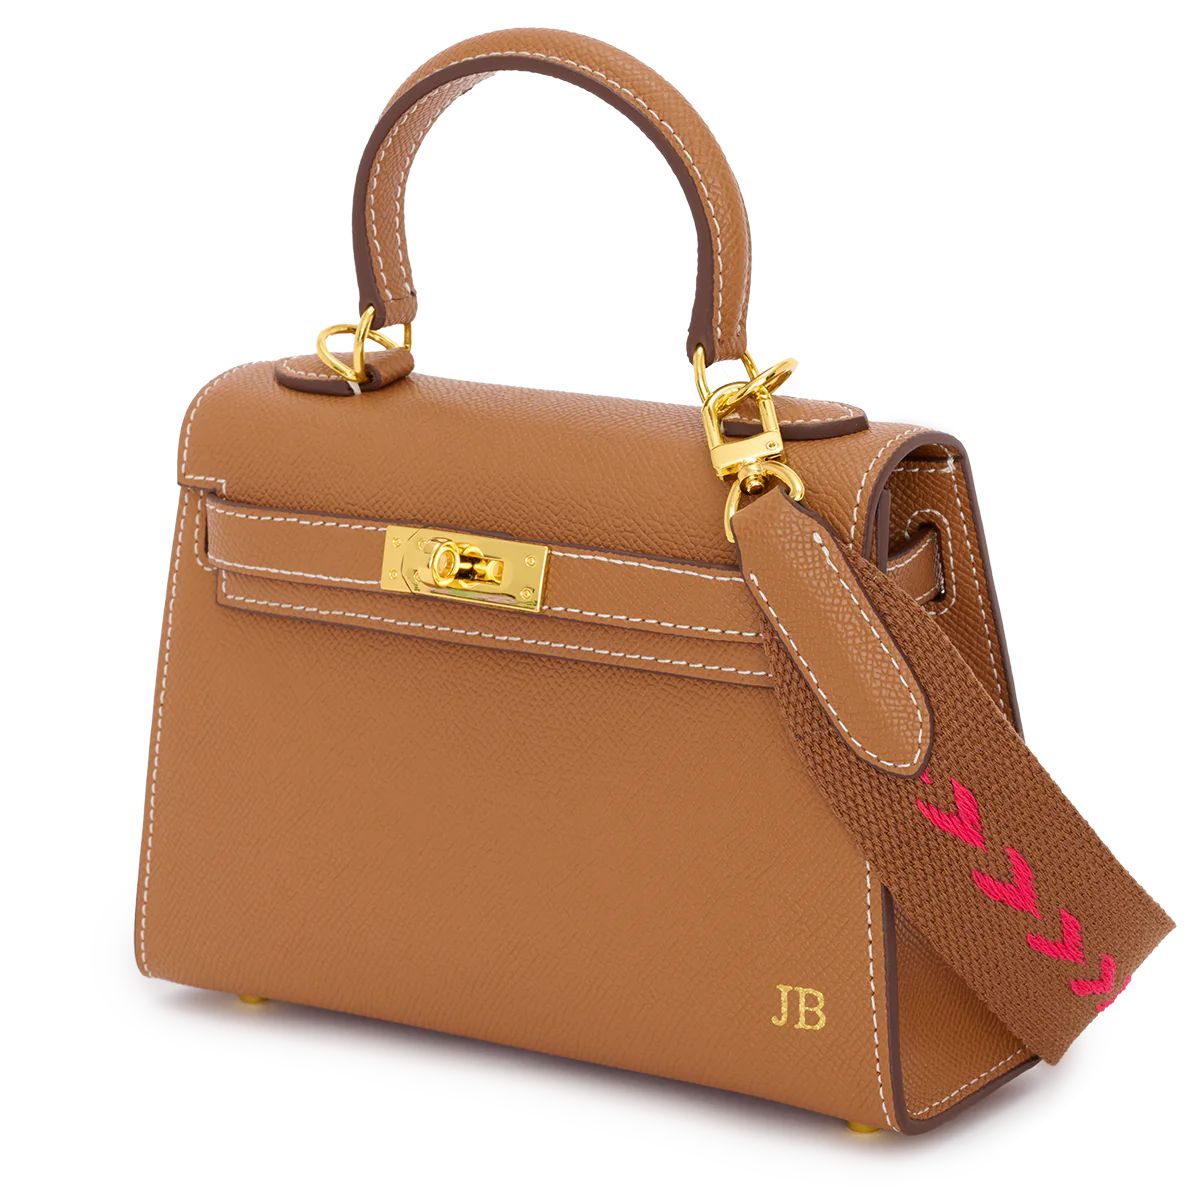 Lily & Bean Hettie Mini Bag -  Tan with Initials & fabric Patterned Strap | Lily and Bean